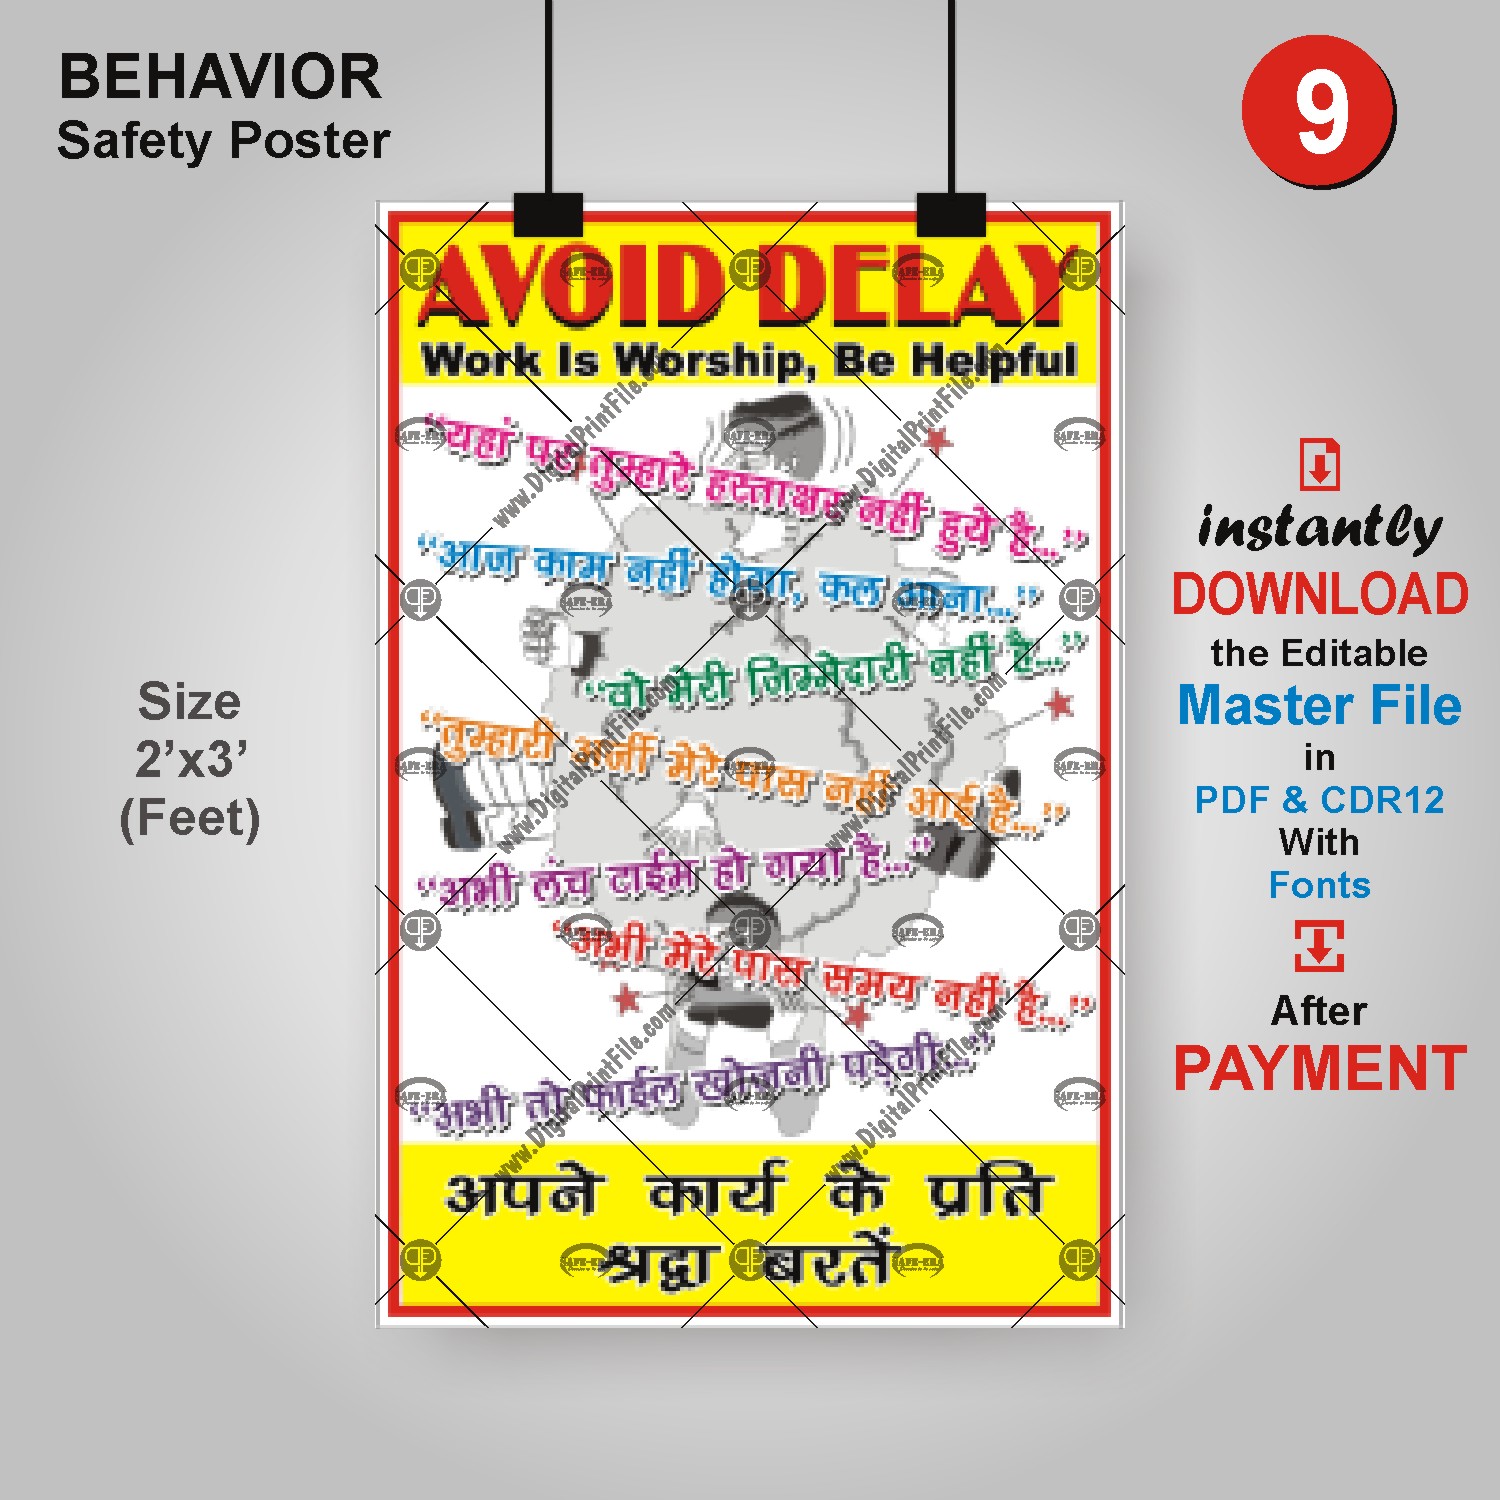 Avoid Delay – Safety Poster